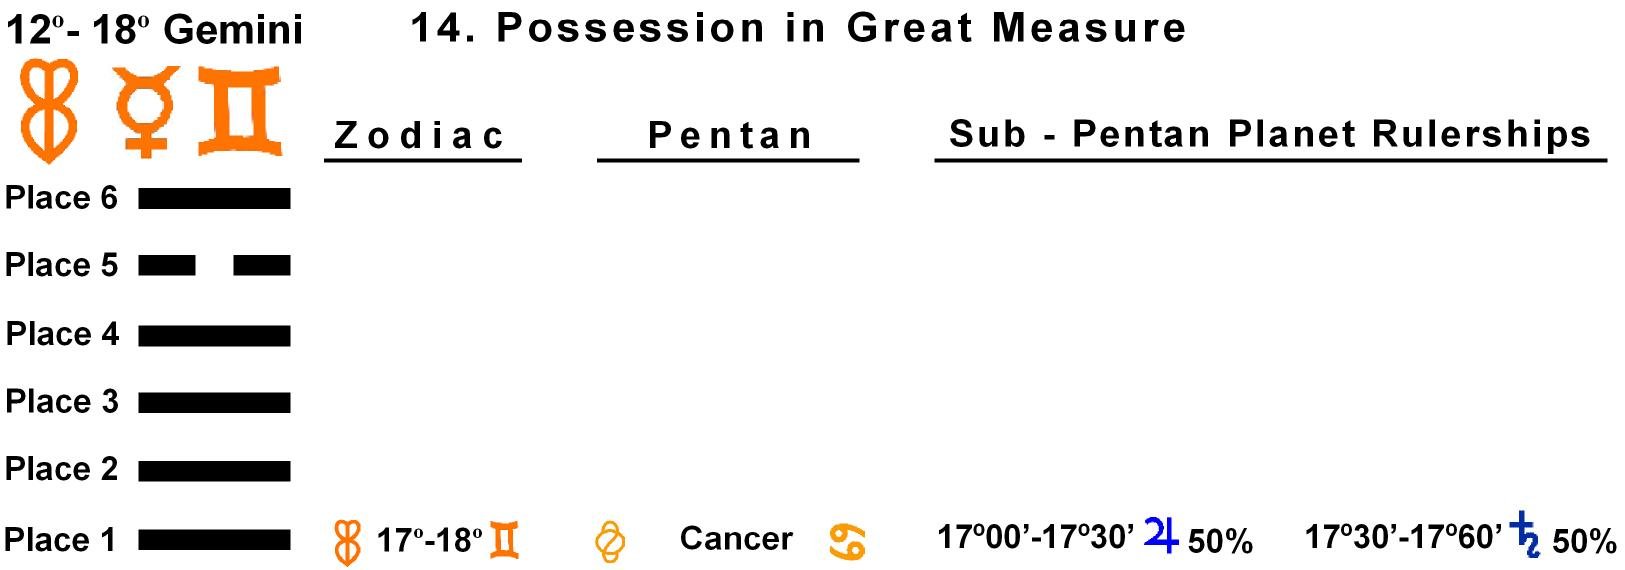 Pent-lines-03GE 17-18 Hx-14 Possession In Great Measure